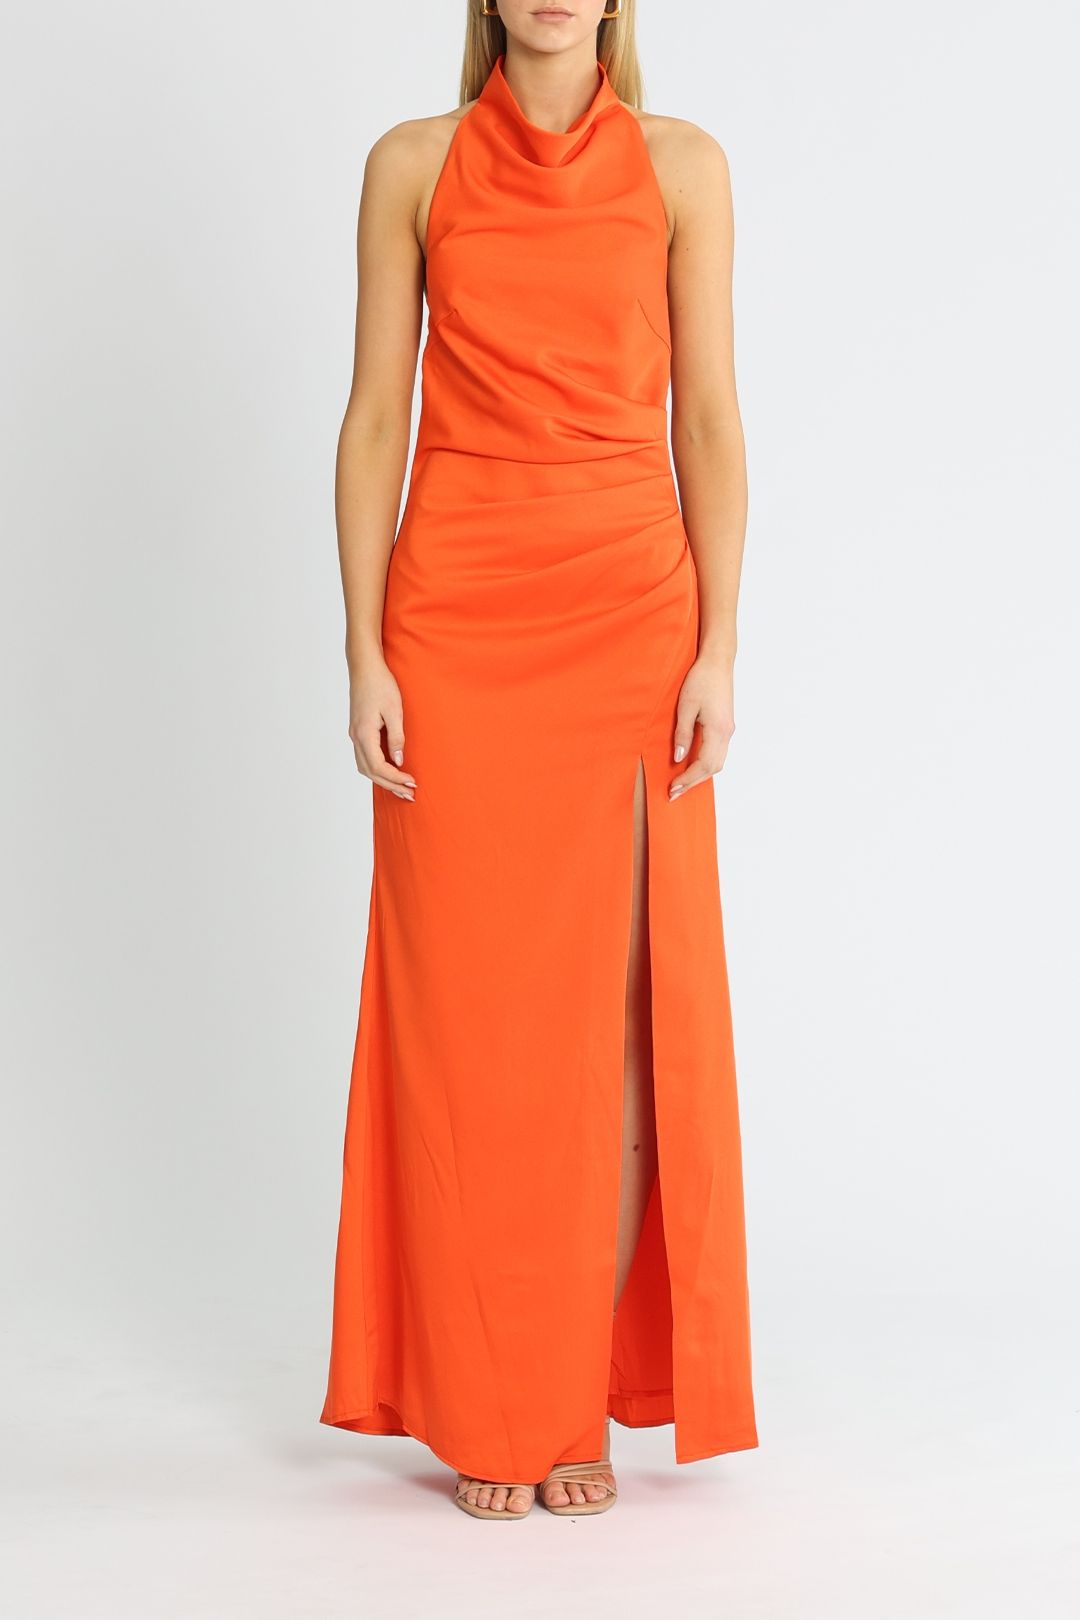 Caprice Halter Gown by Montique for Rent